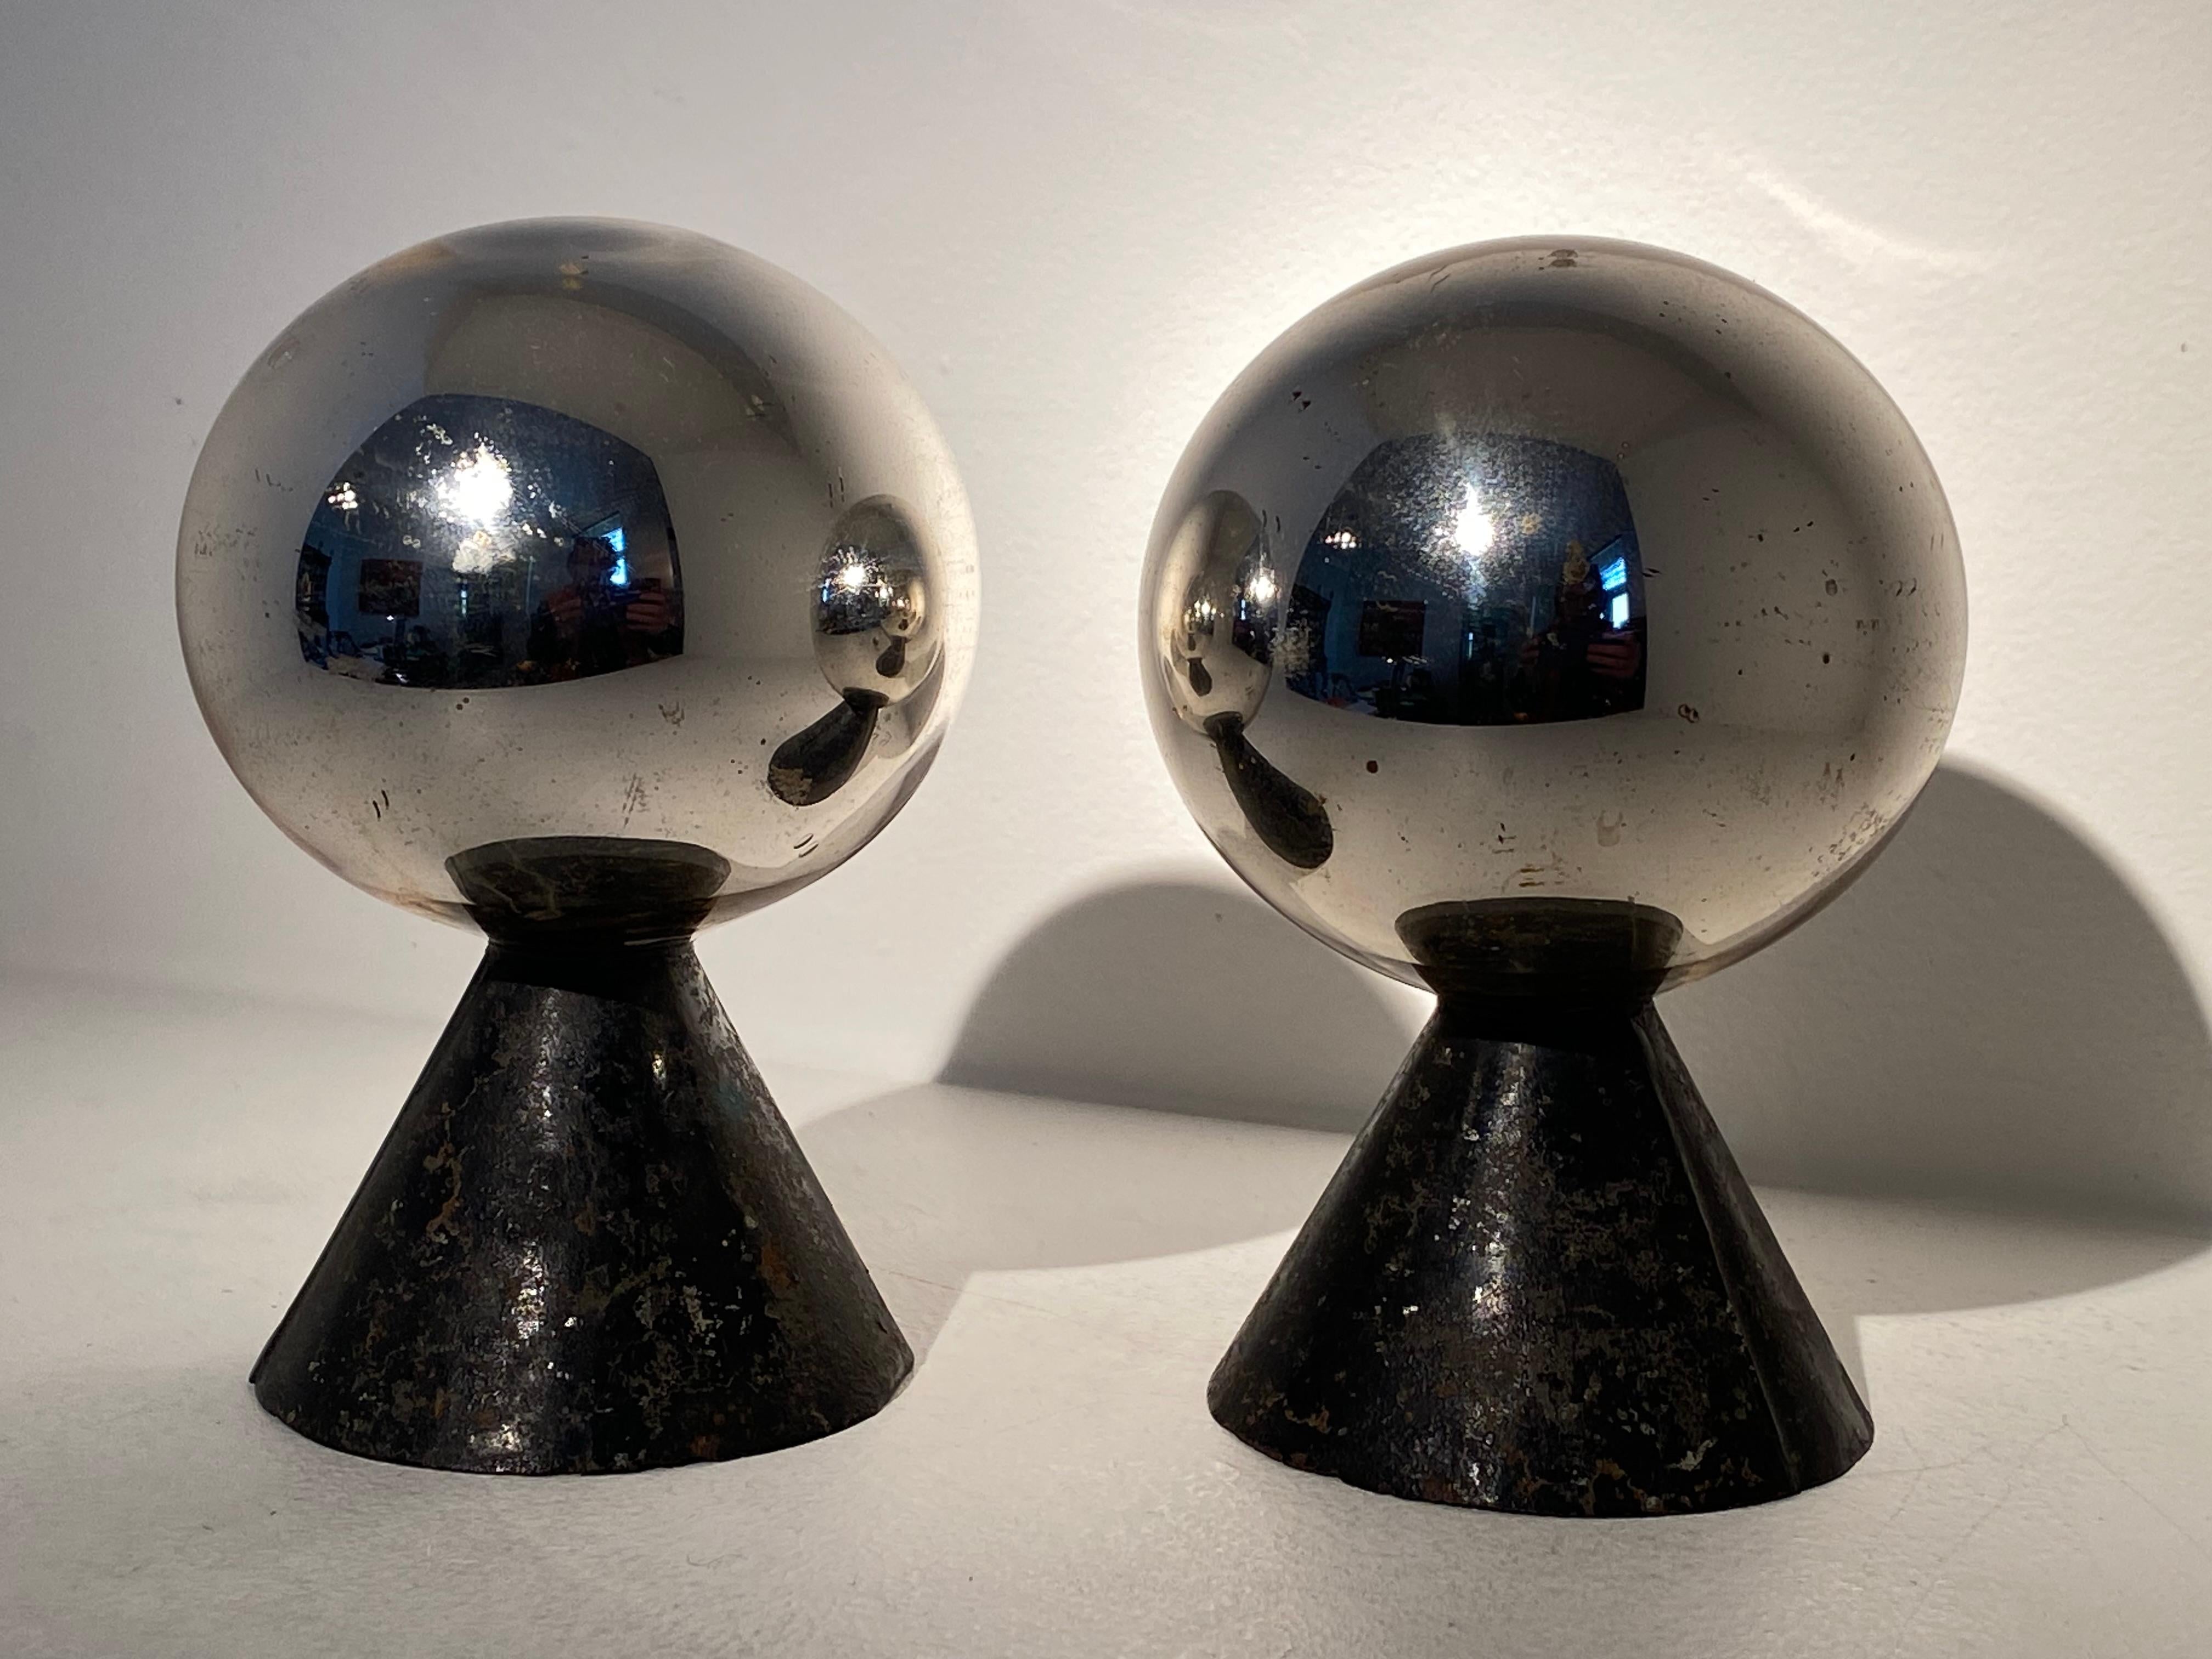 An exceptional small pair of English balls in Mercury Glass,
mounted on a Wooden Base,
the mirrored glass has an old and used patina and are miniature Butlers Balls-Mirrors,
very decorative pair of objects, ideal to place in your Cabinet of